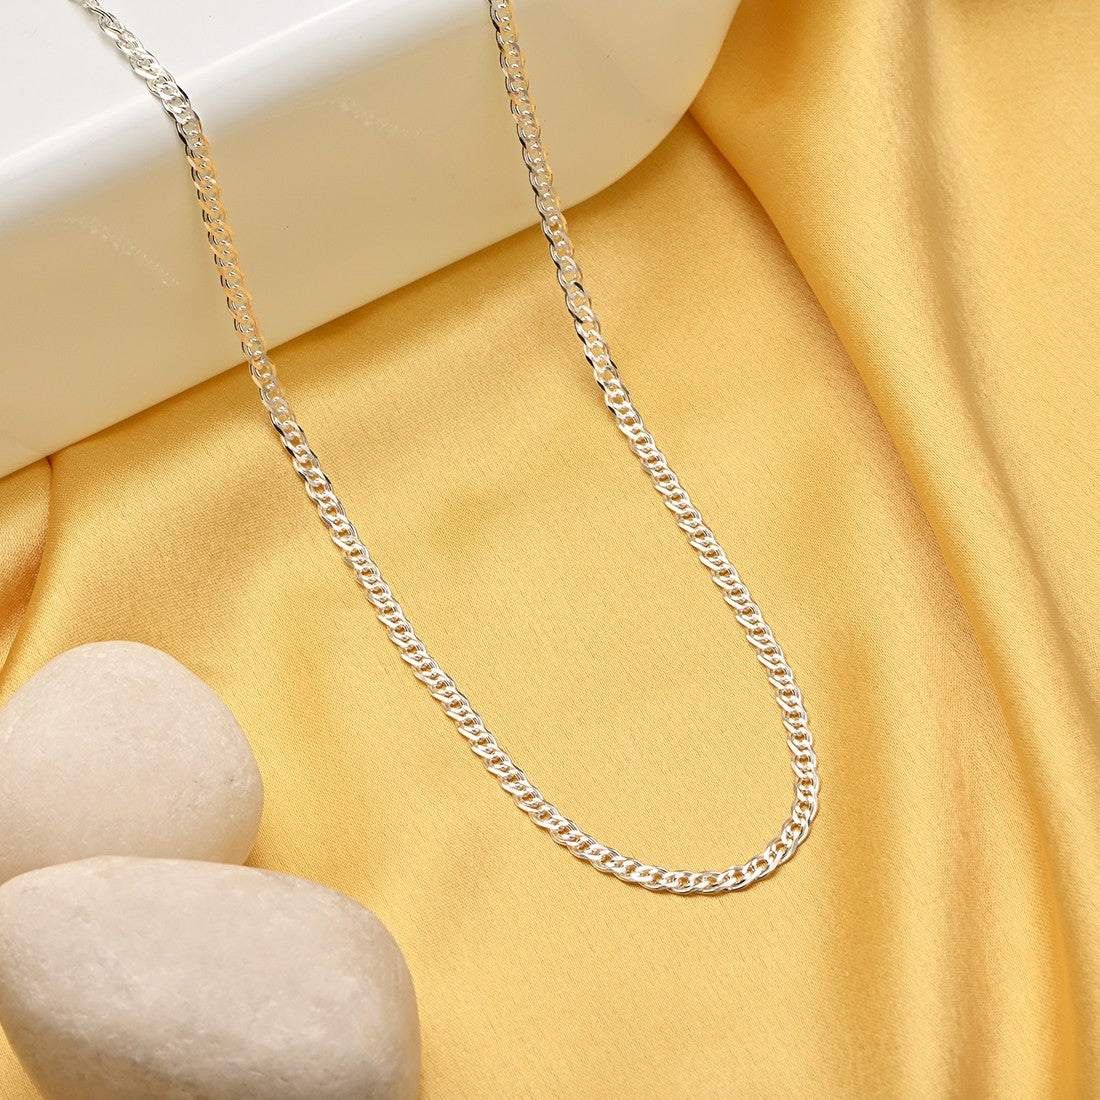 Masculine Elegance Rhodium-Plated Sterling Silver Weave Chain for Men